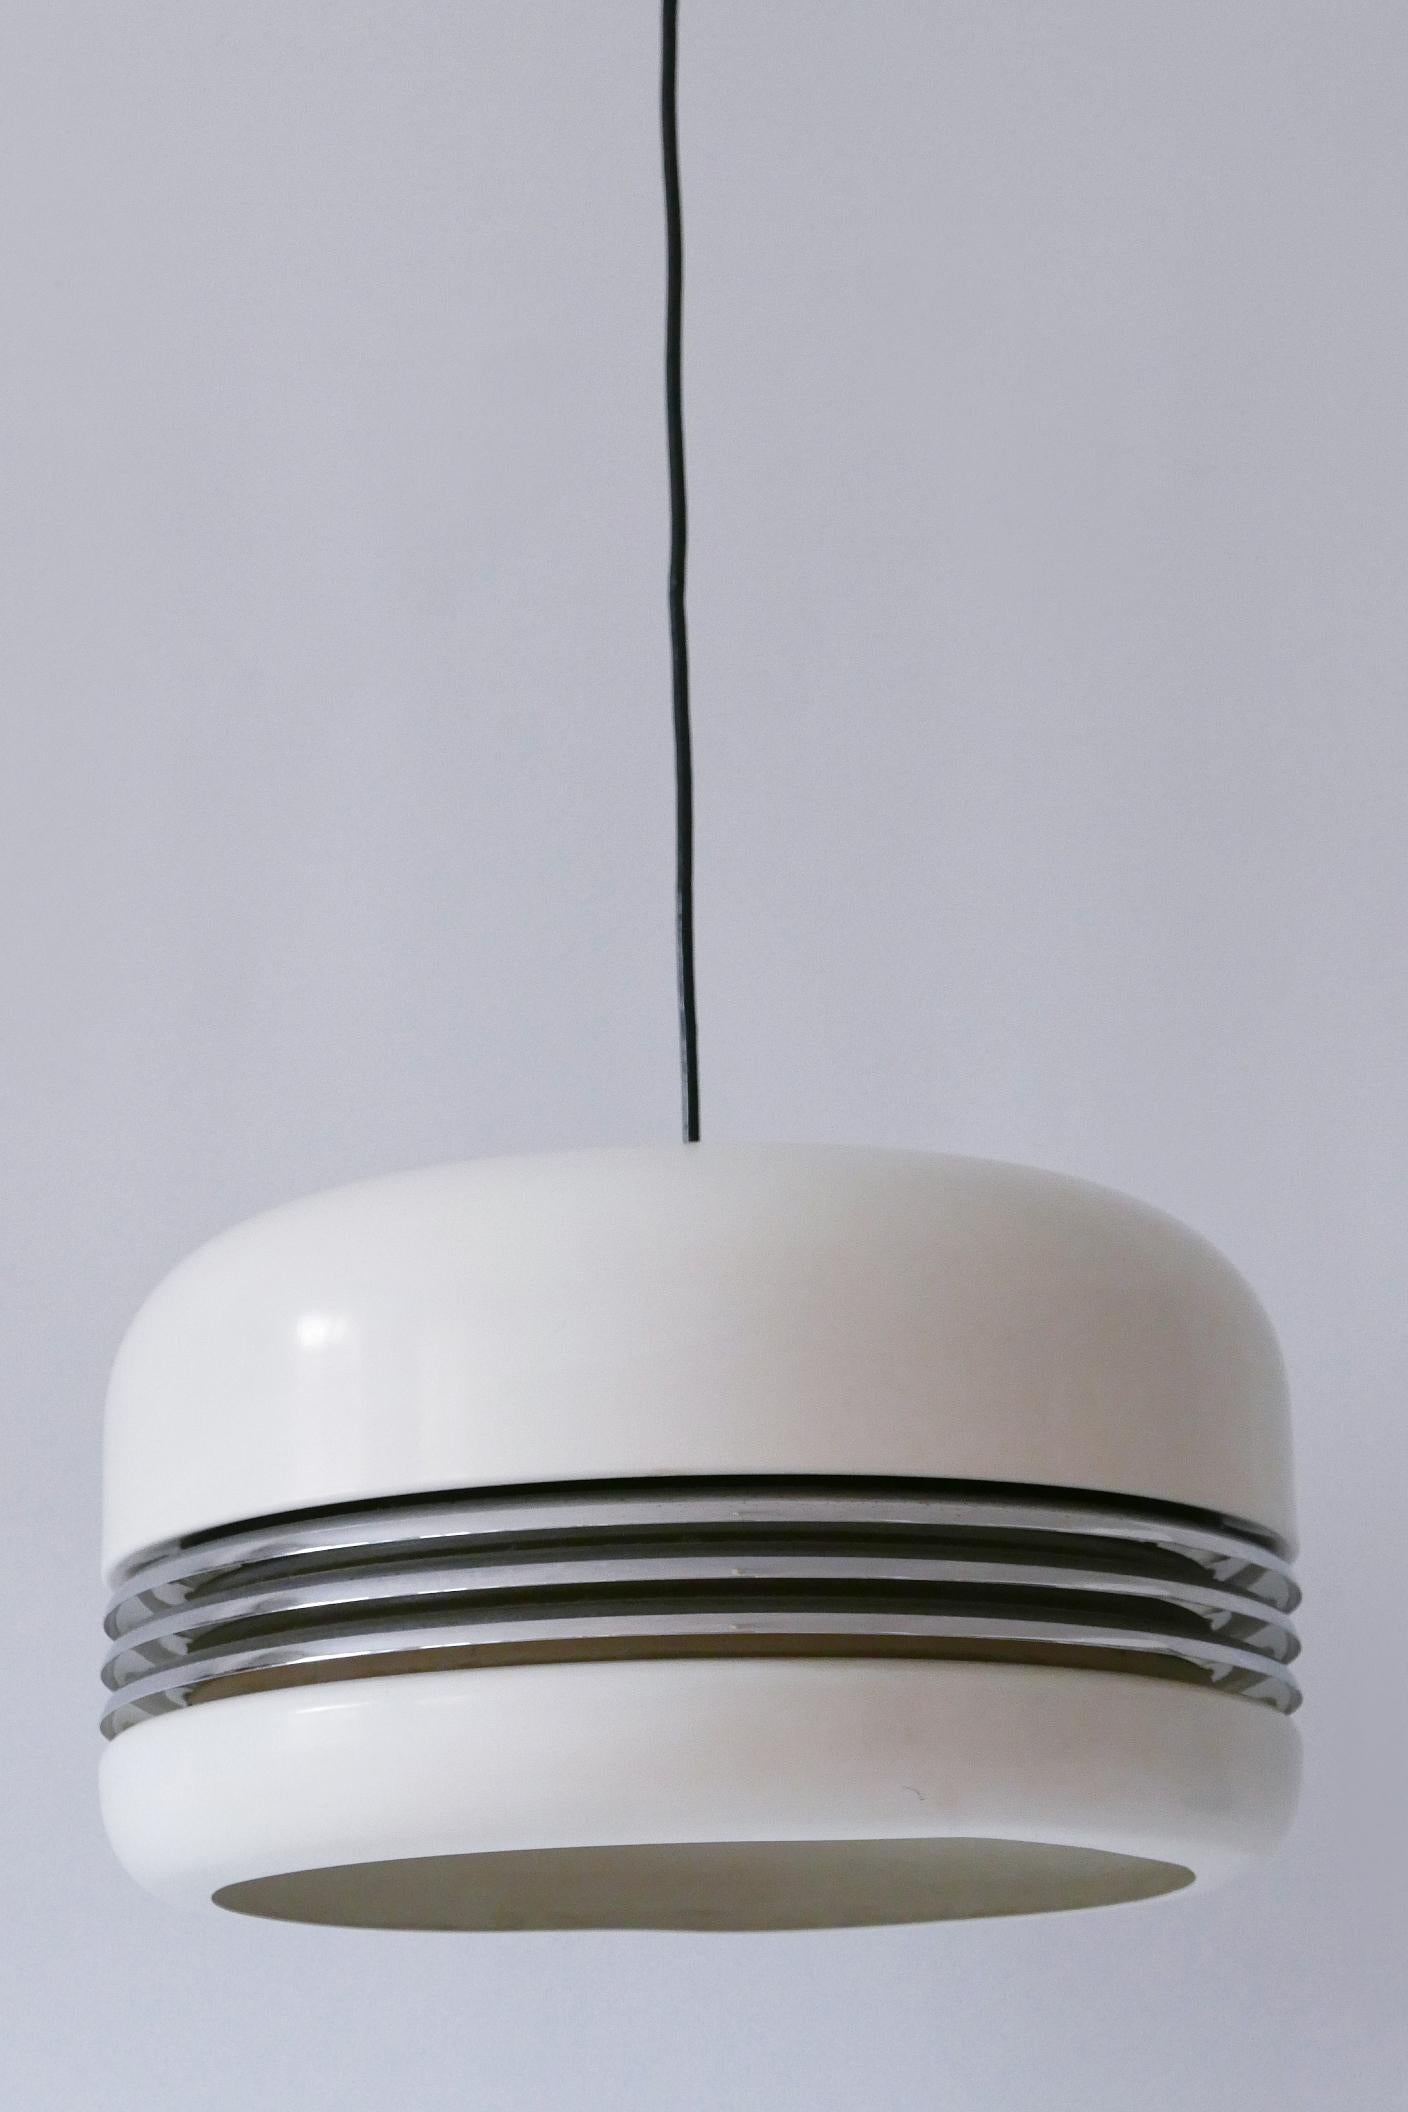 Chrome Large Pendant Lamp '5526' by Alfred Kalthoff für Staff & Schwarz Germany 1960s For Sale